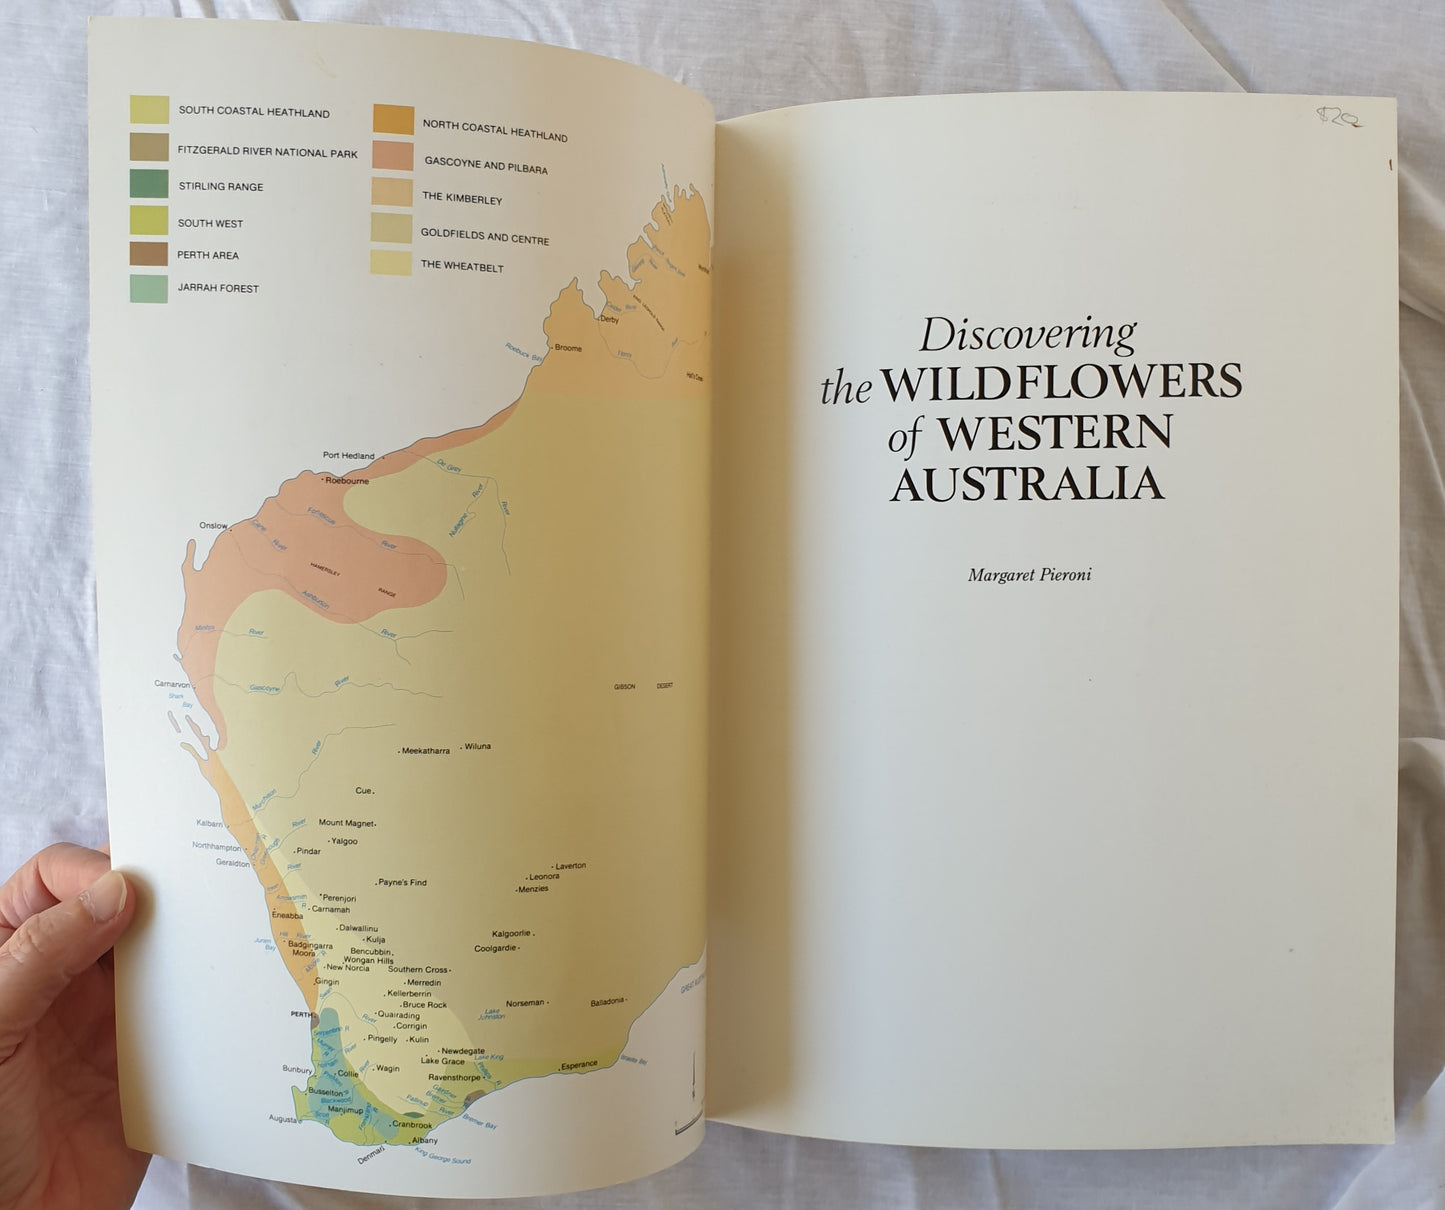 Discovering the Wildflowers of Western Australia by Margaret Pieroni